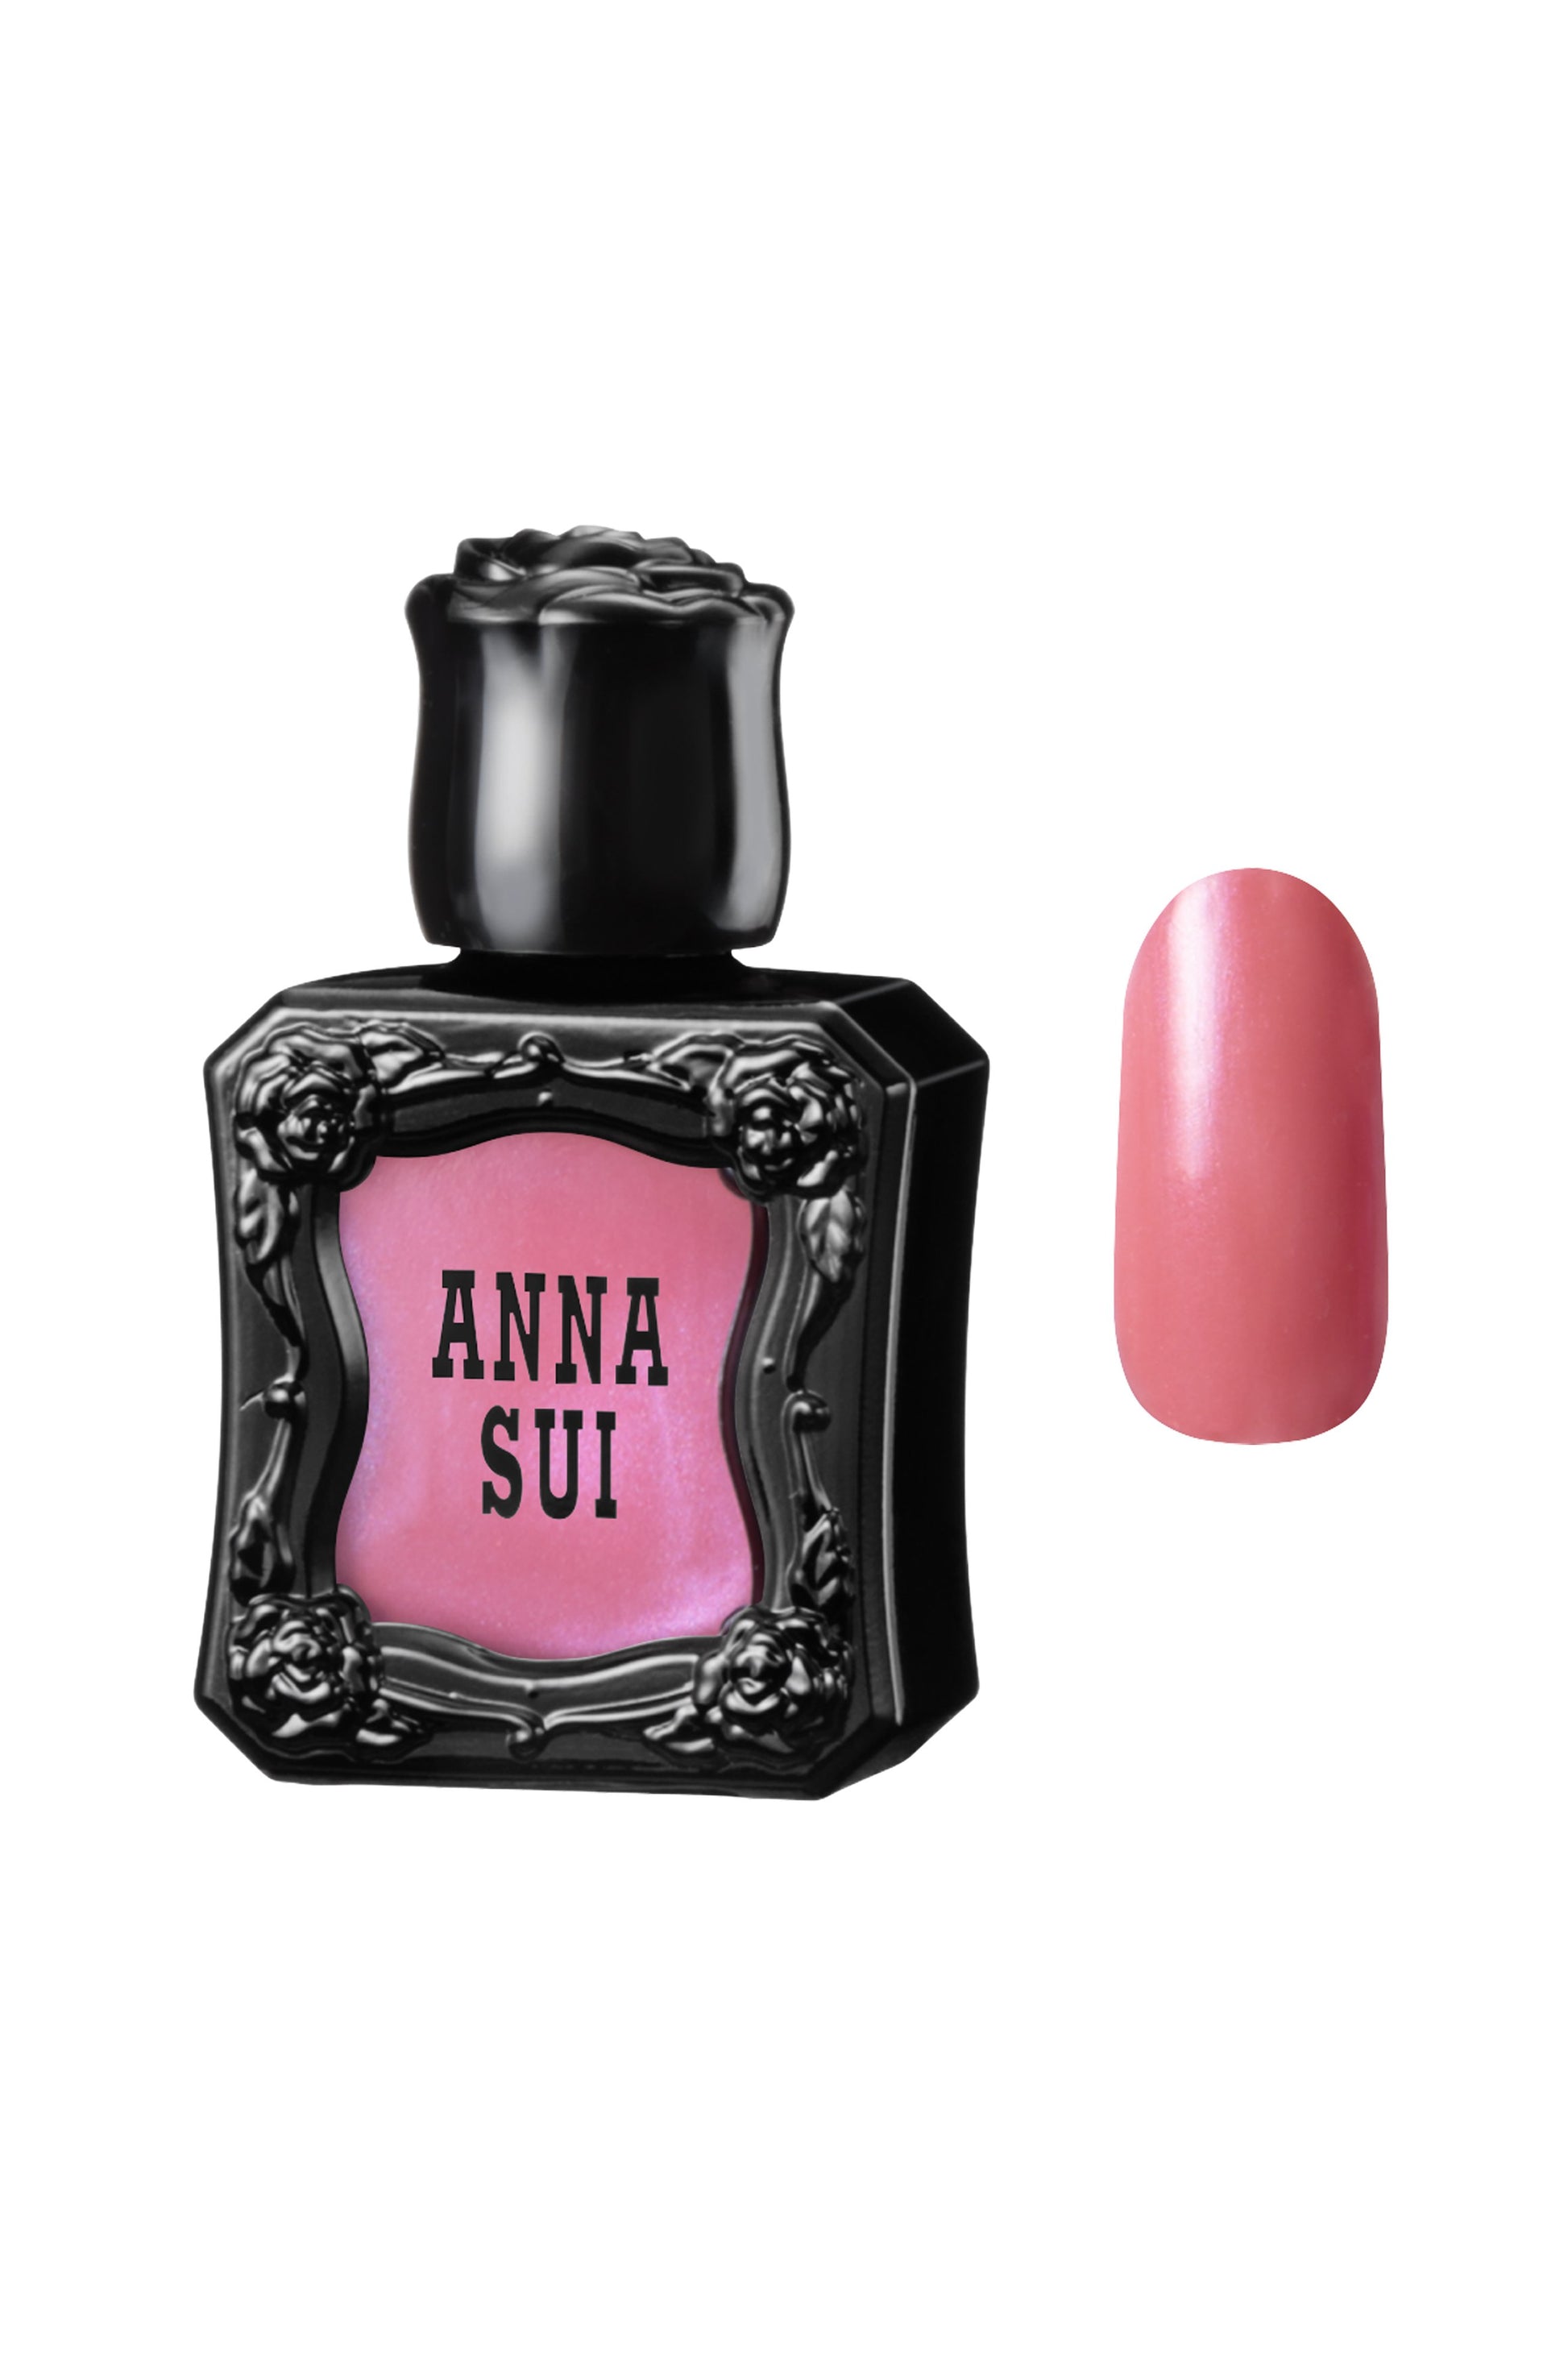 NEON PINK Nail Polish bottle raised rose pattern, Anna Sui in black over nail colors in bottle front